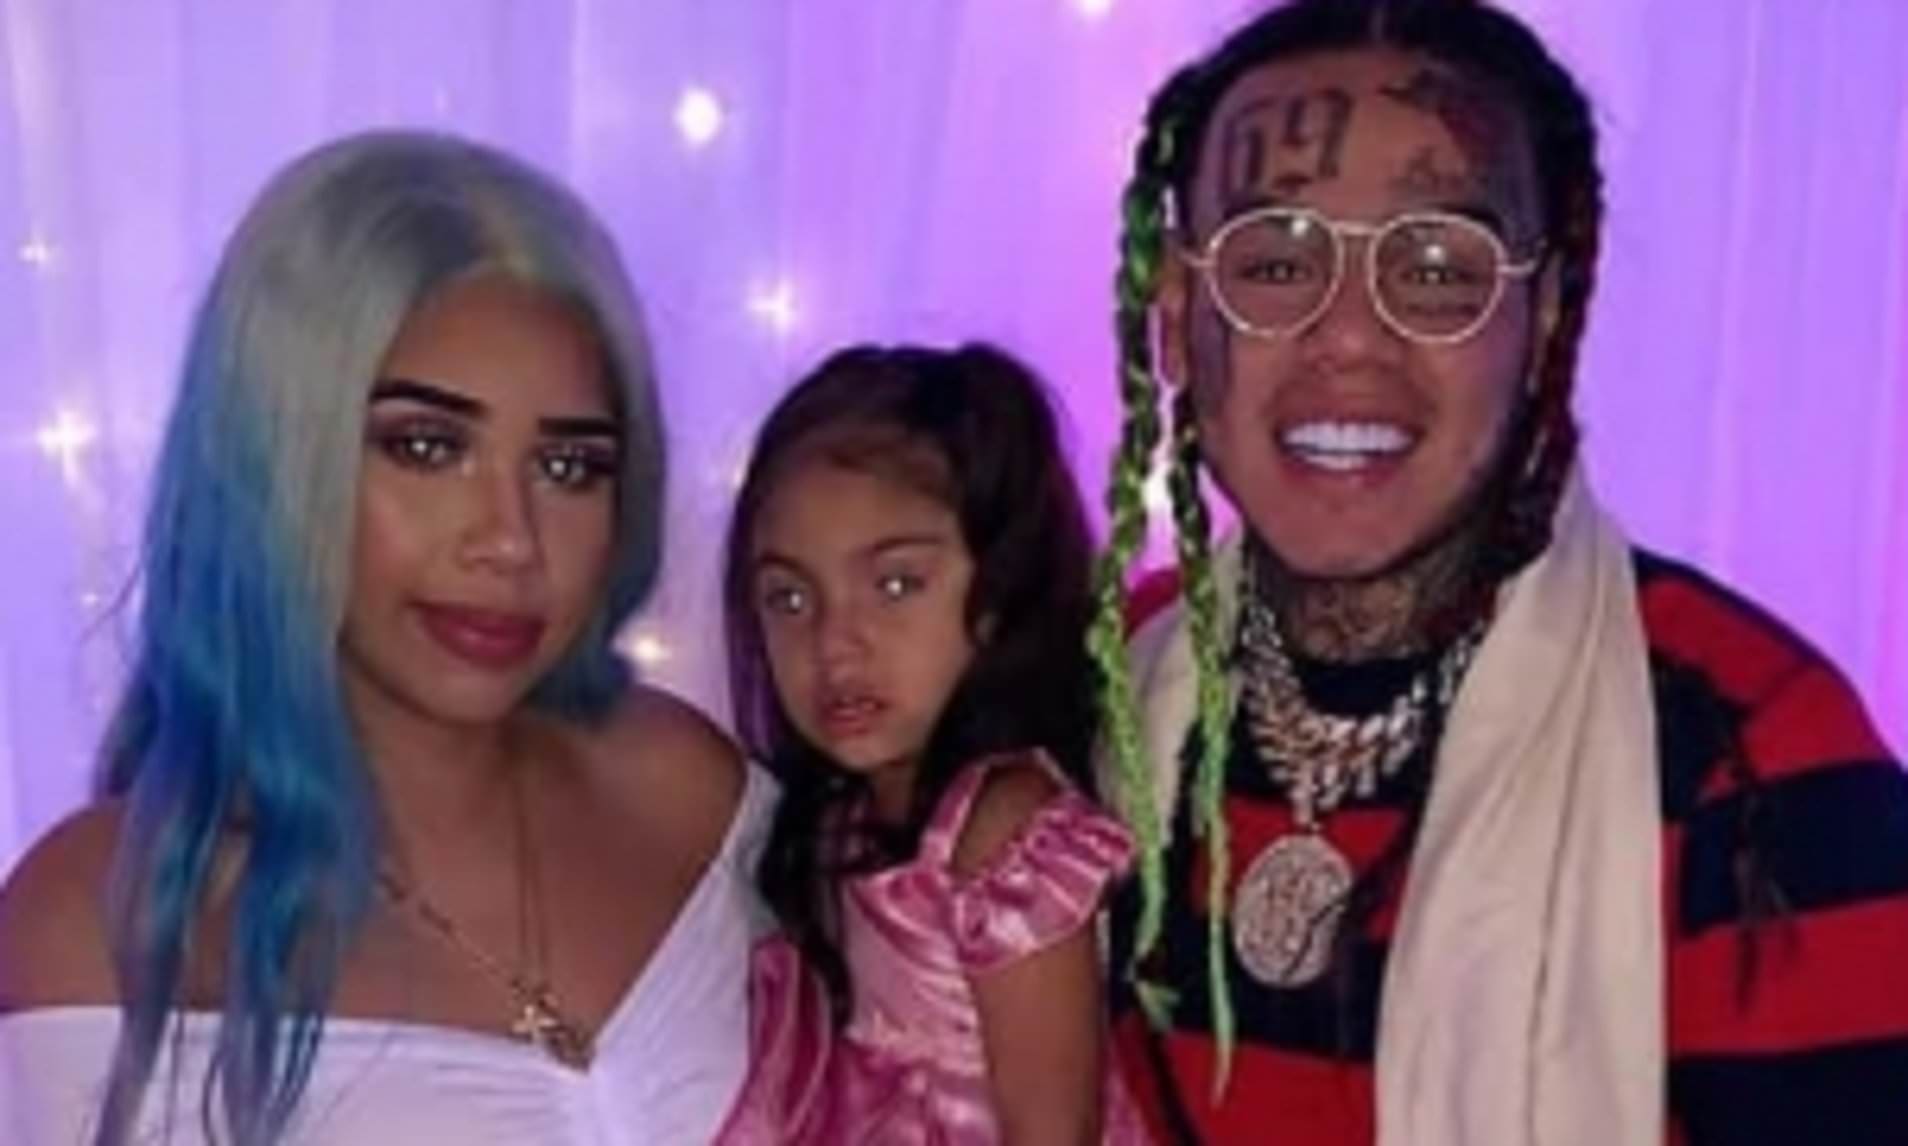 ”sara-molina-responds-to-tekashi-69s-accusations-of-not-being-able-to-spend-time-with-their-daughter”